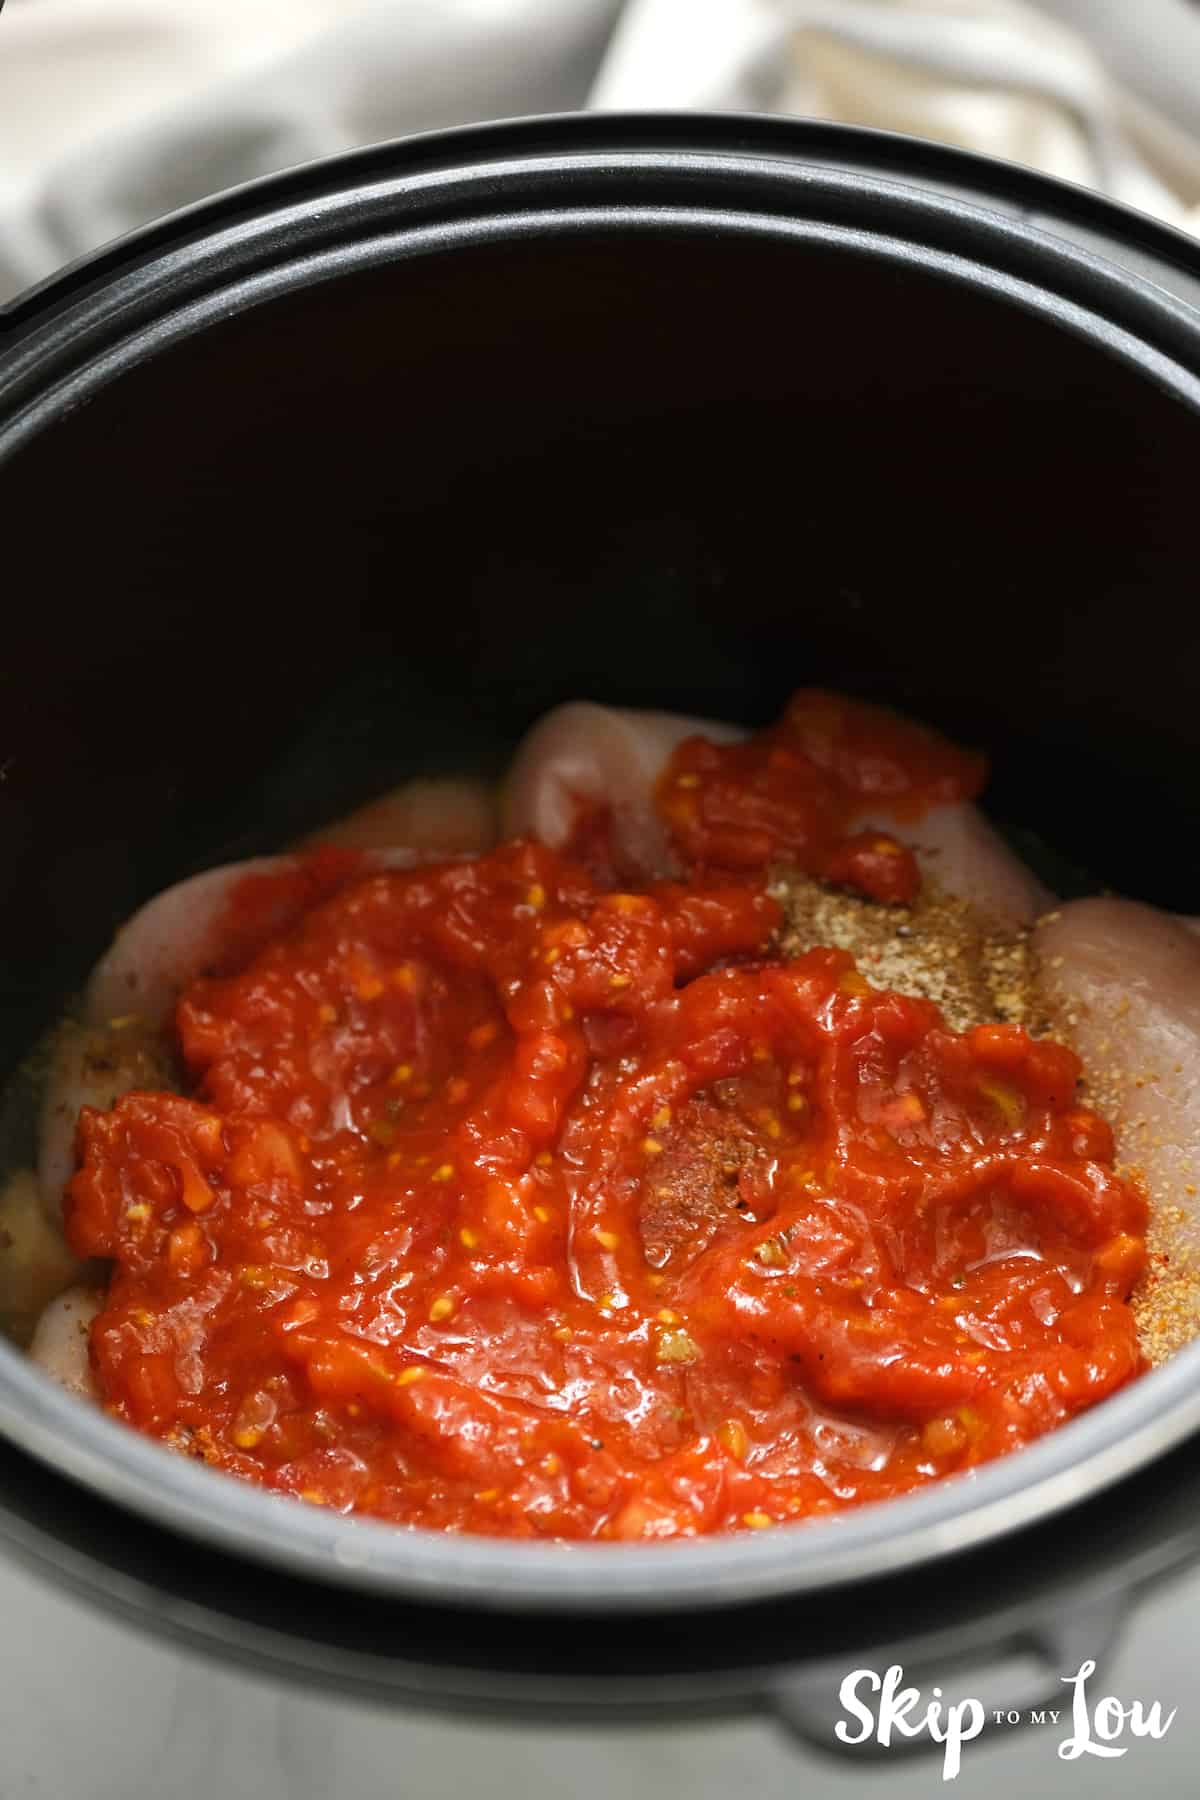 add salsa on top and prepare your instant pot for Salsa Chicken